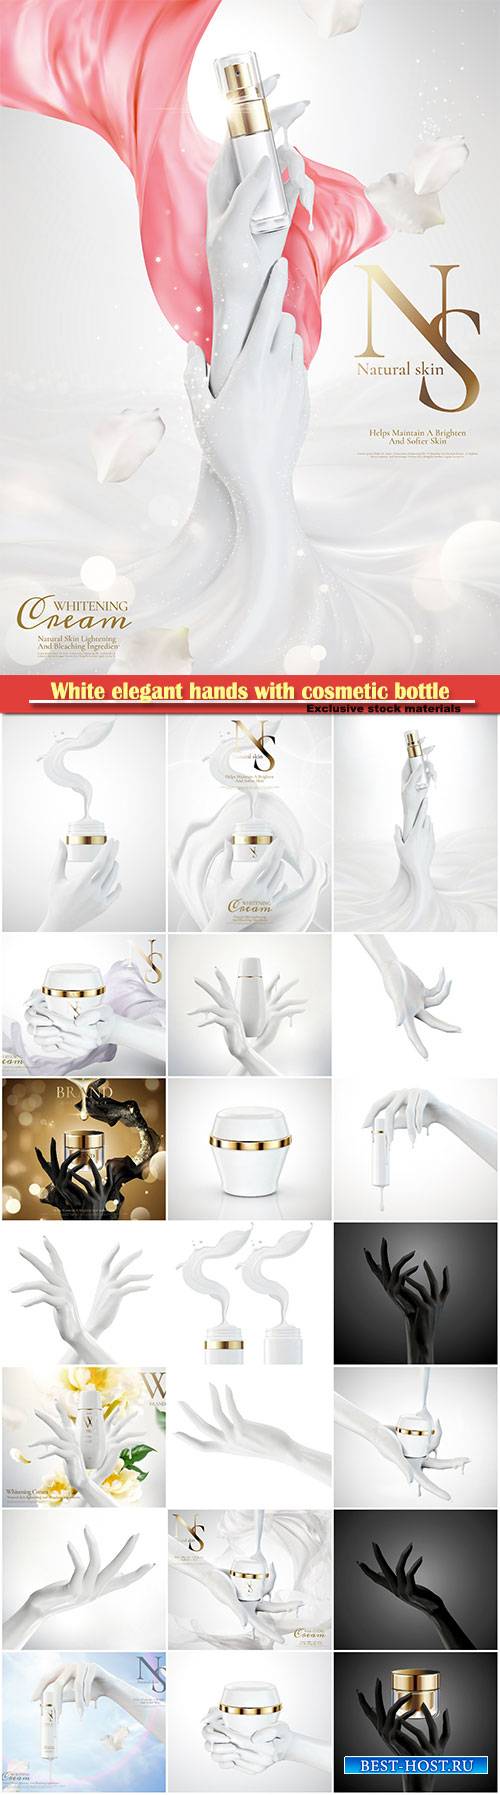 White elegant hands with cosmetic bottle in 3d illustration